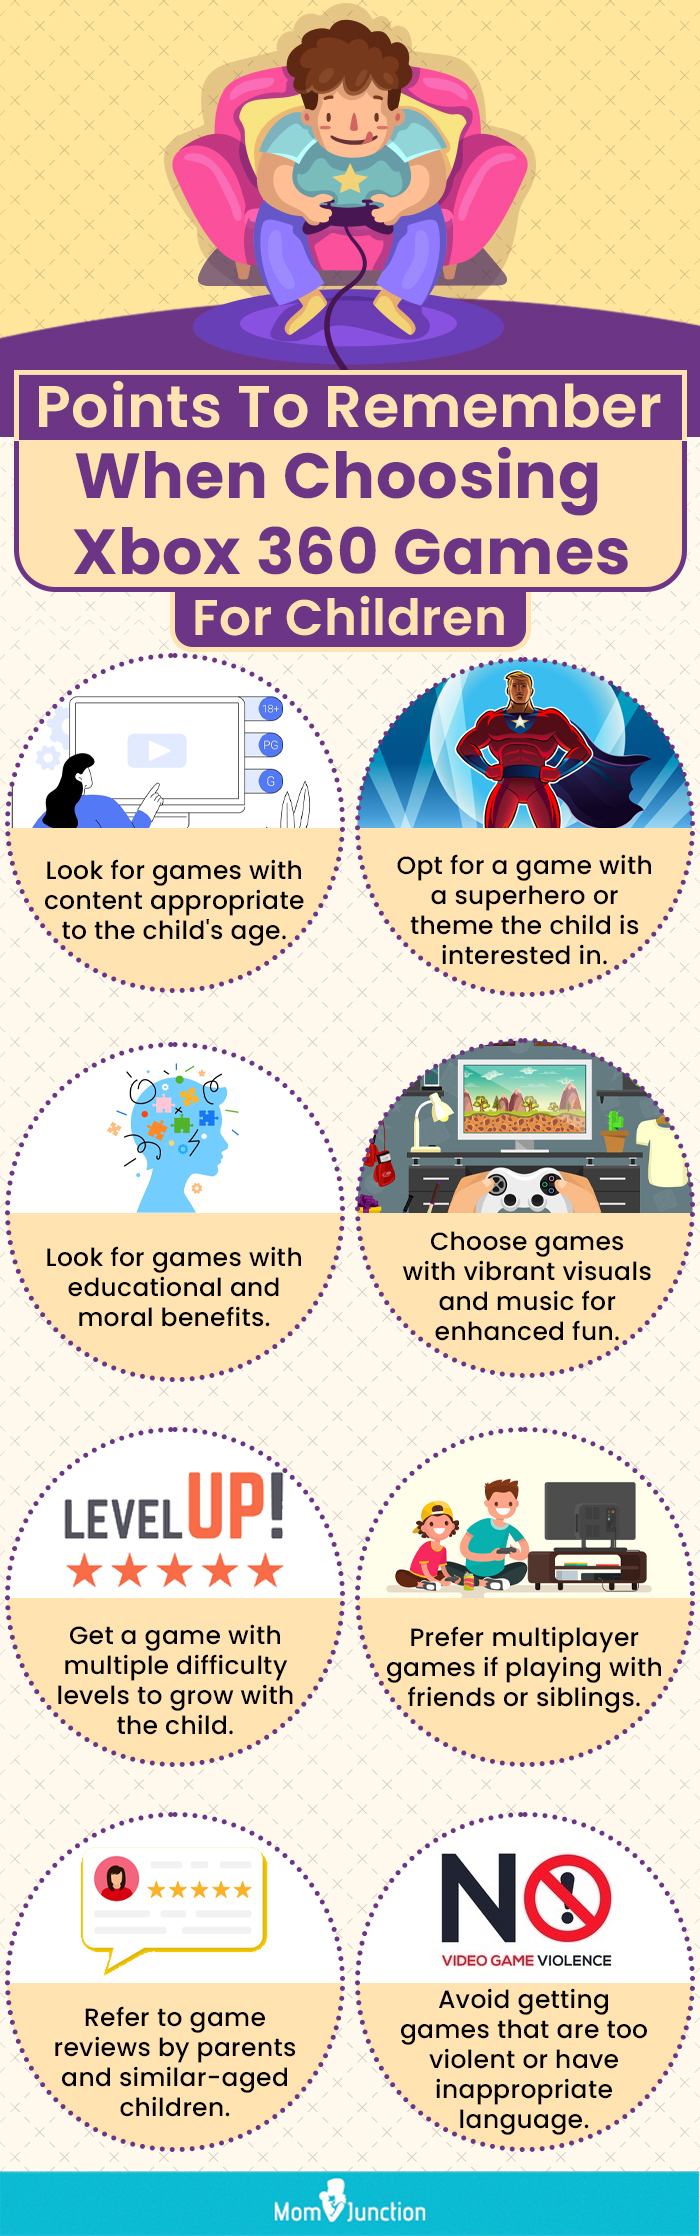 Points To Remember When Choosing A Xbox 360 Games For Children (infographic)